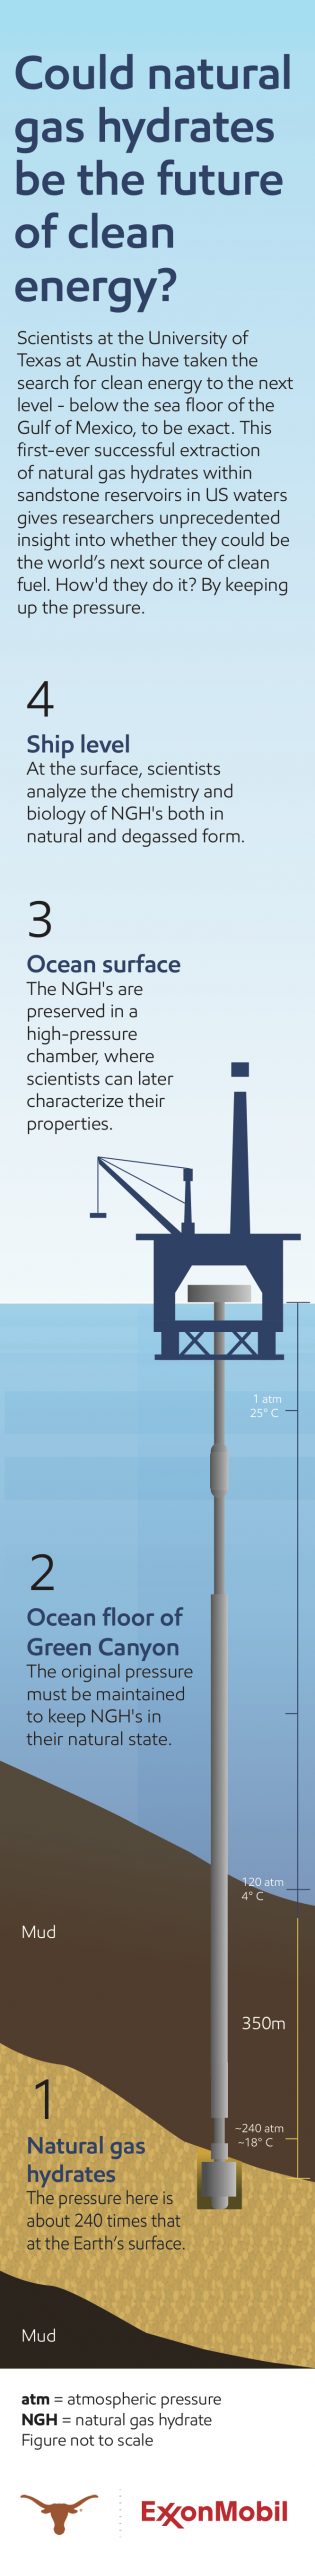 Infographic titled could natural gas hydrates be the future of clean energy